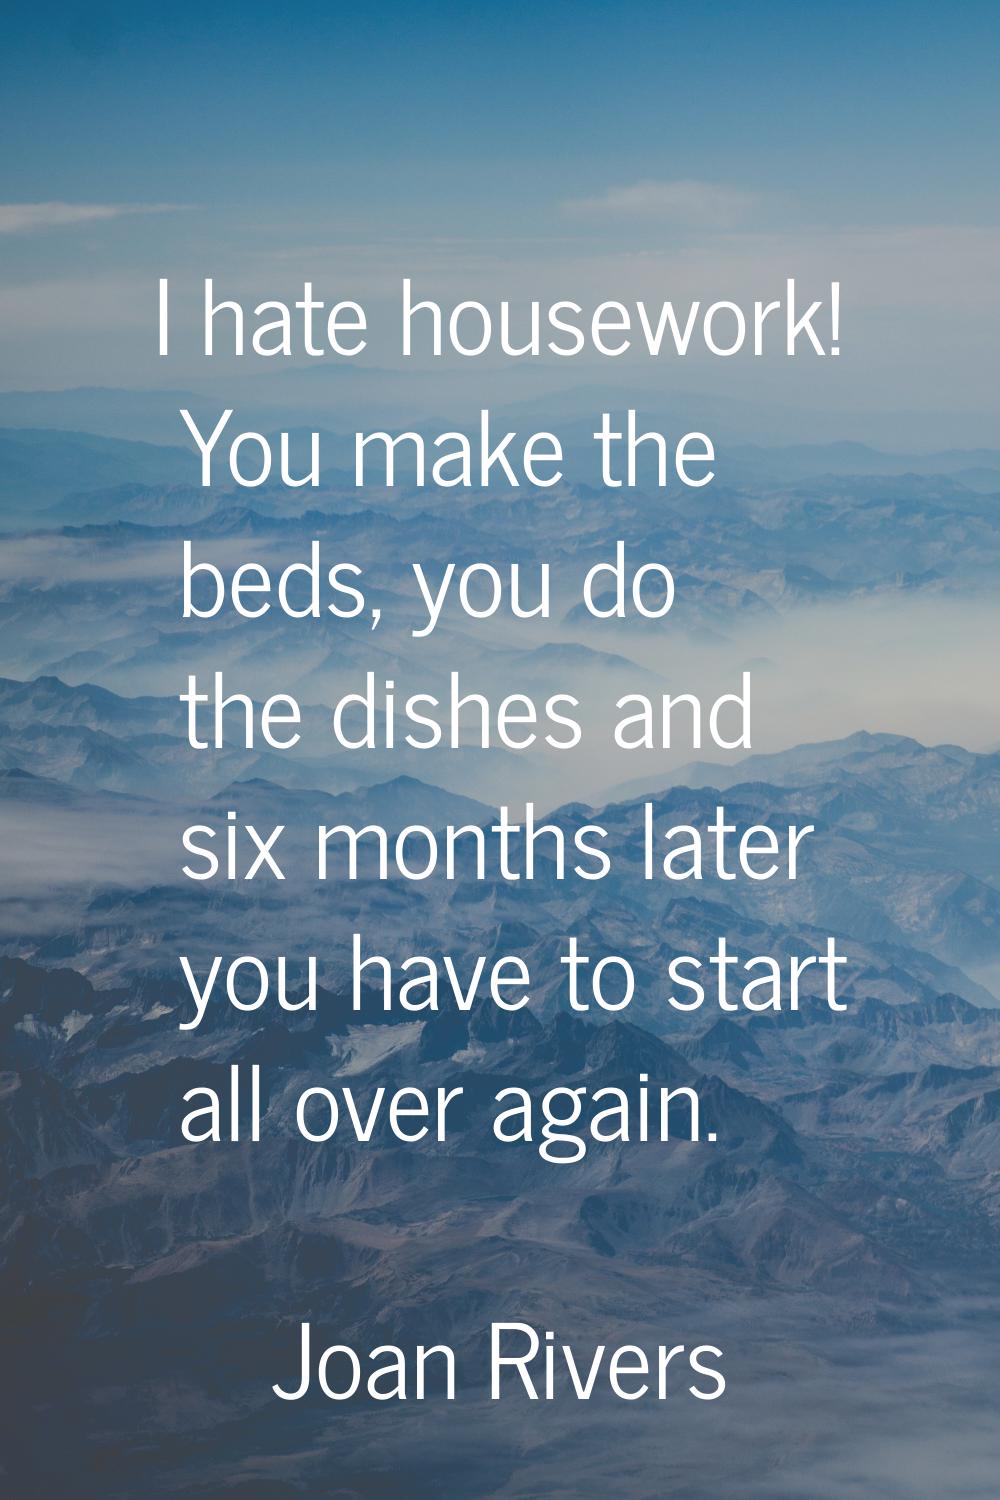 I hate housework! You make the beds, you do the dishes and six months later you have to start all o